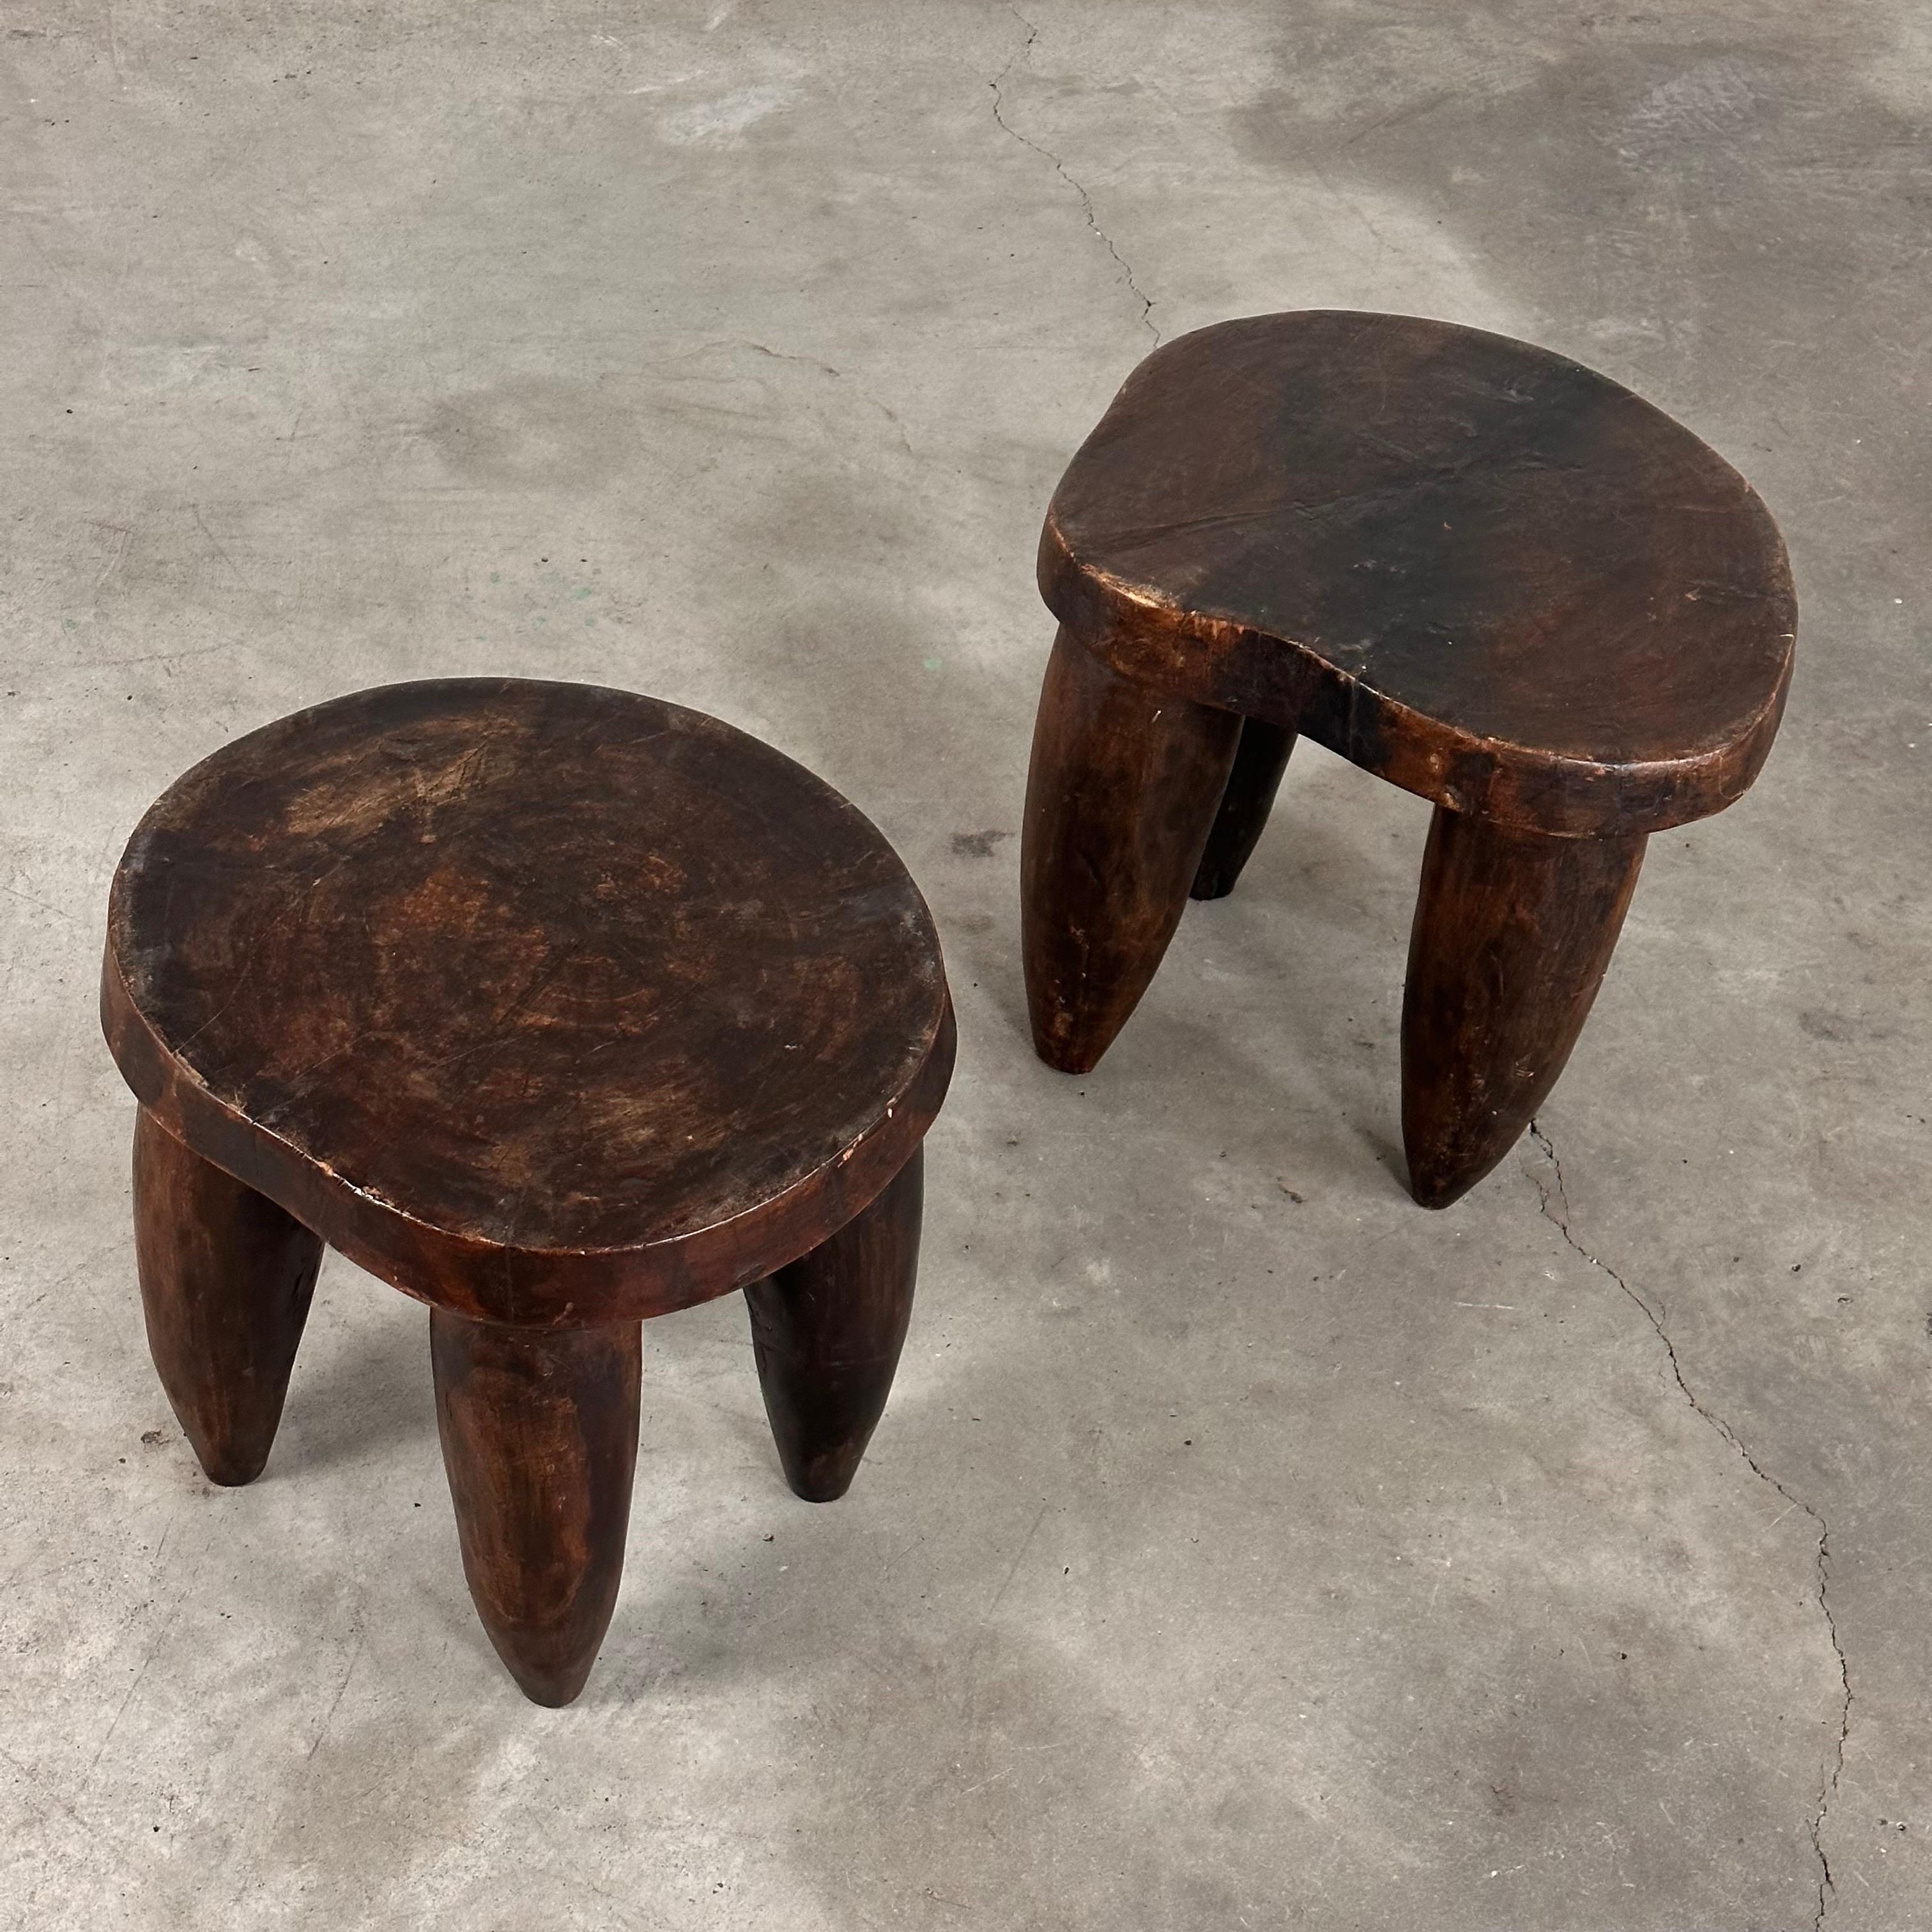 Hand-Crafted Rare Pair of Large African Senufo Stools, Late 20th Century, Highly Decorative For Sale